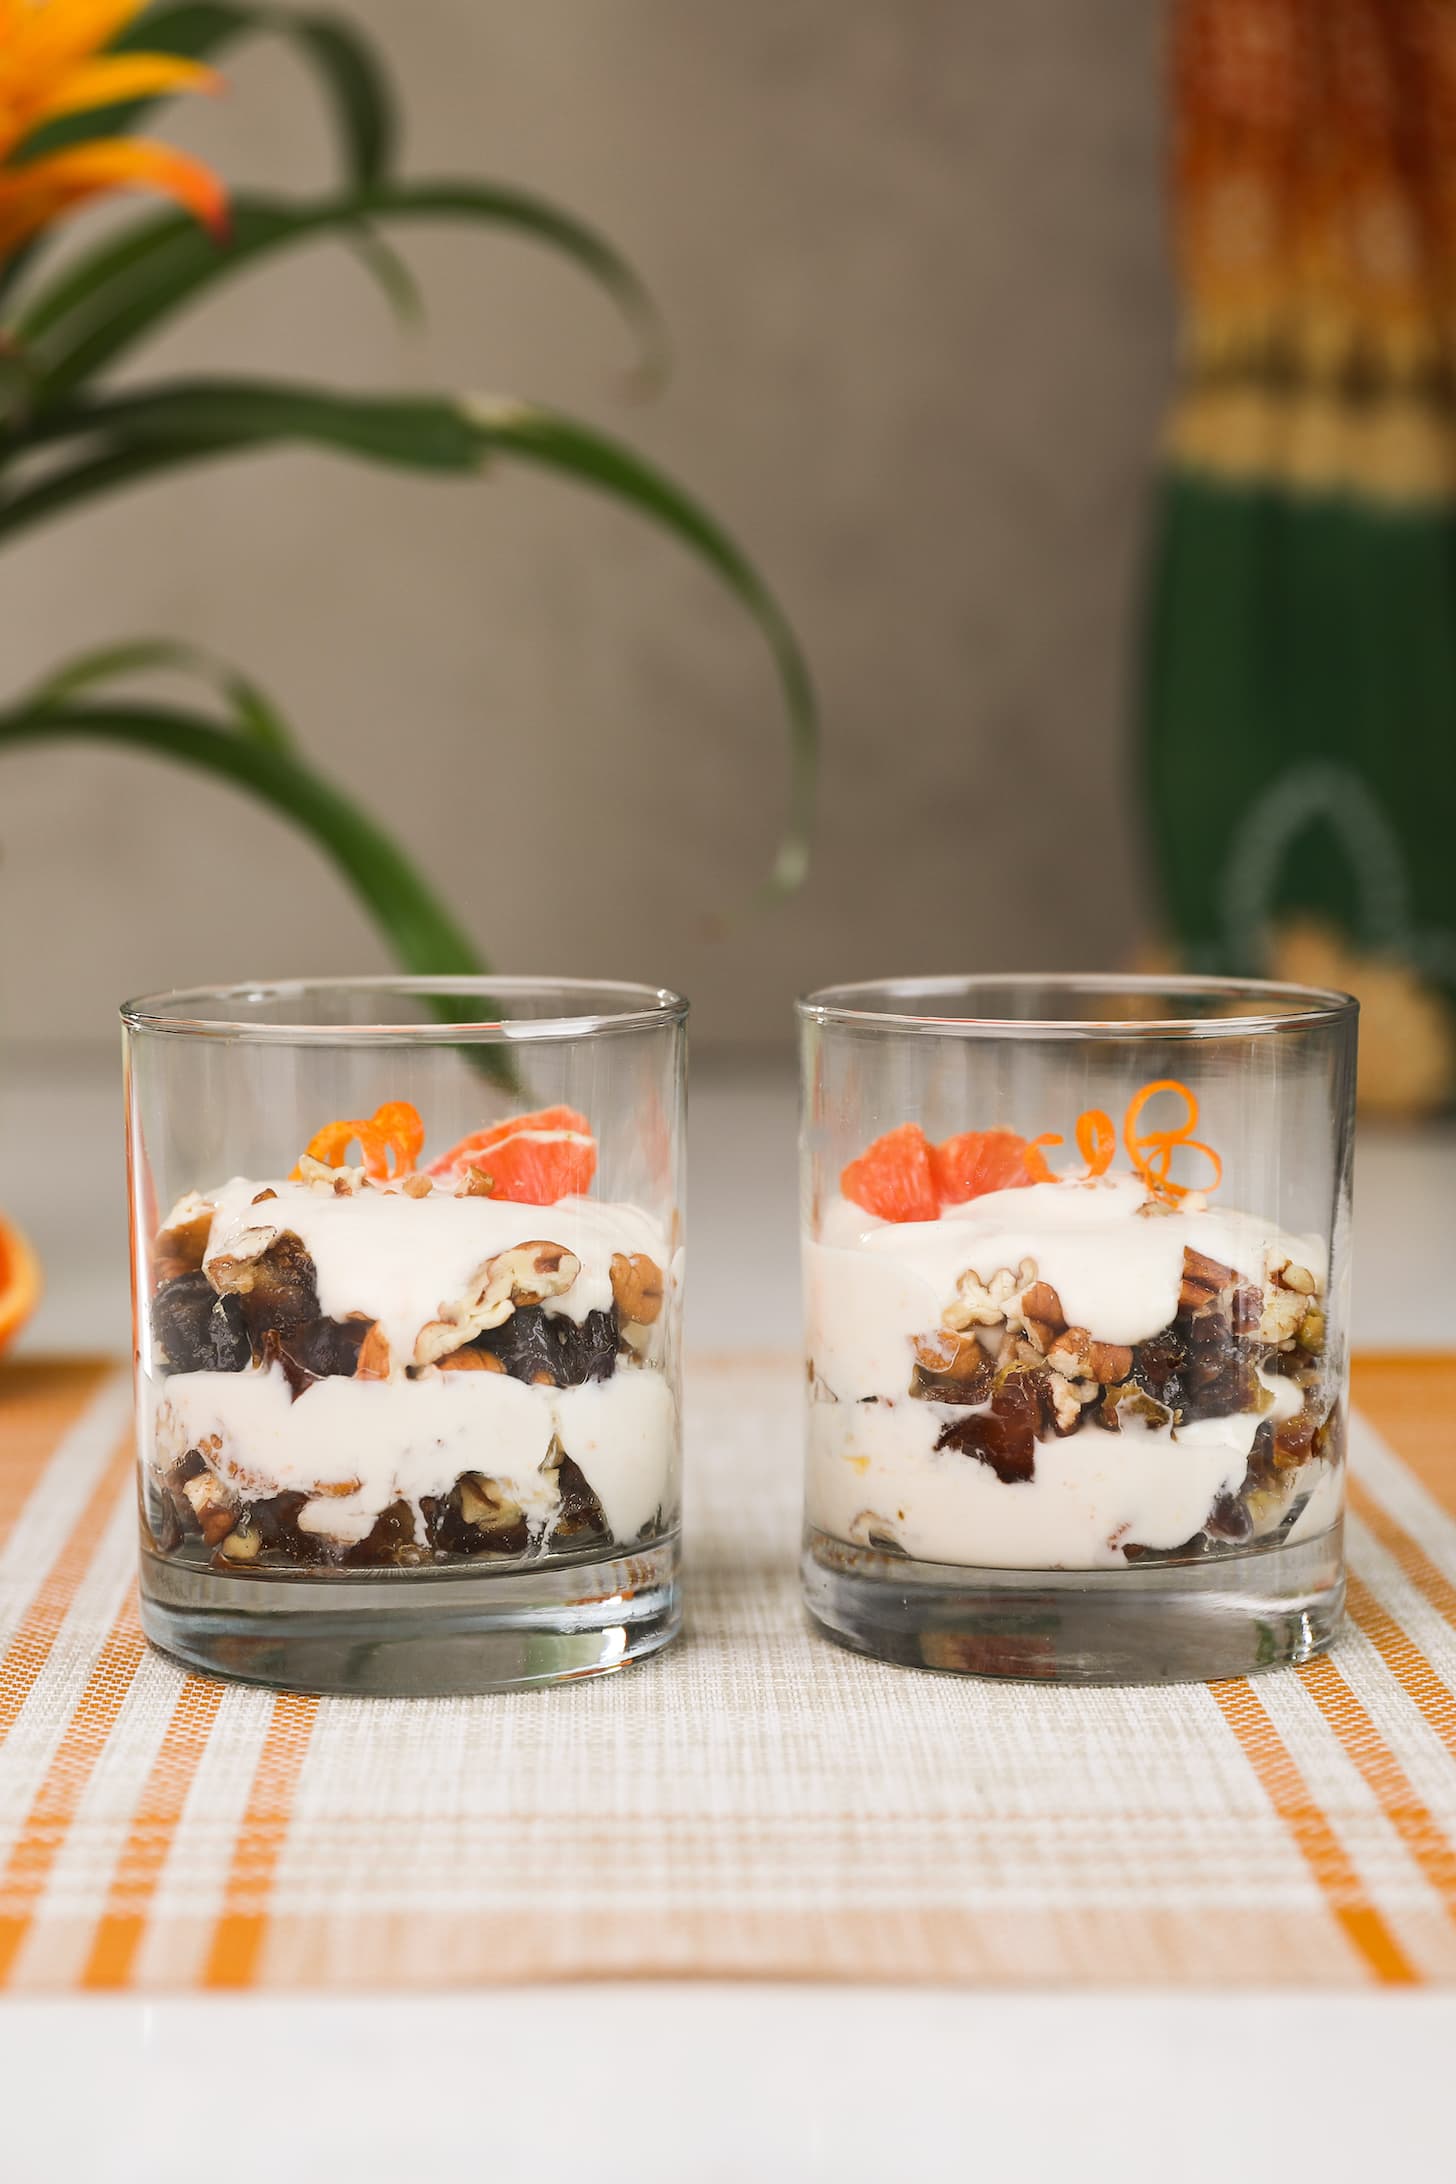 two glasses filled with layers of yogurt and nuts and topped with orange pieces and orange rind curls. There is also a plant in the background.